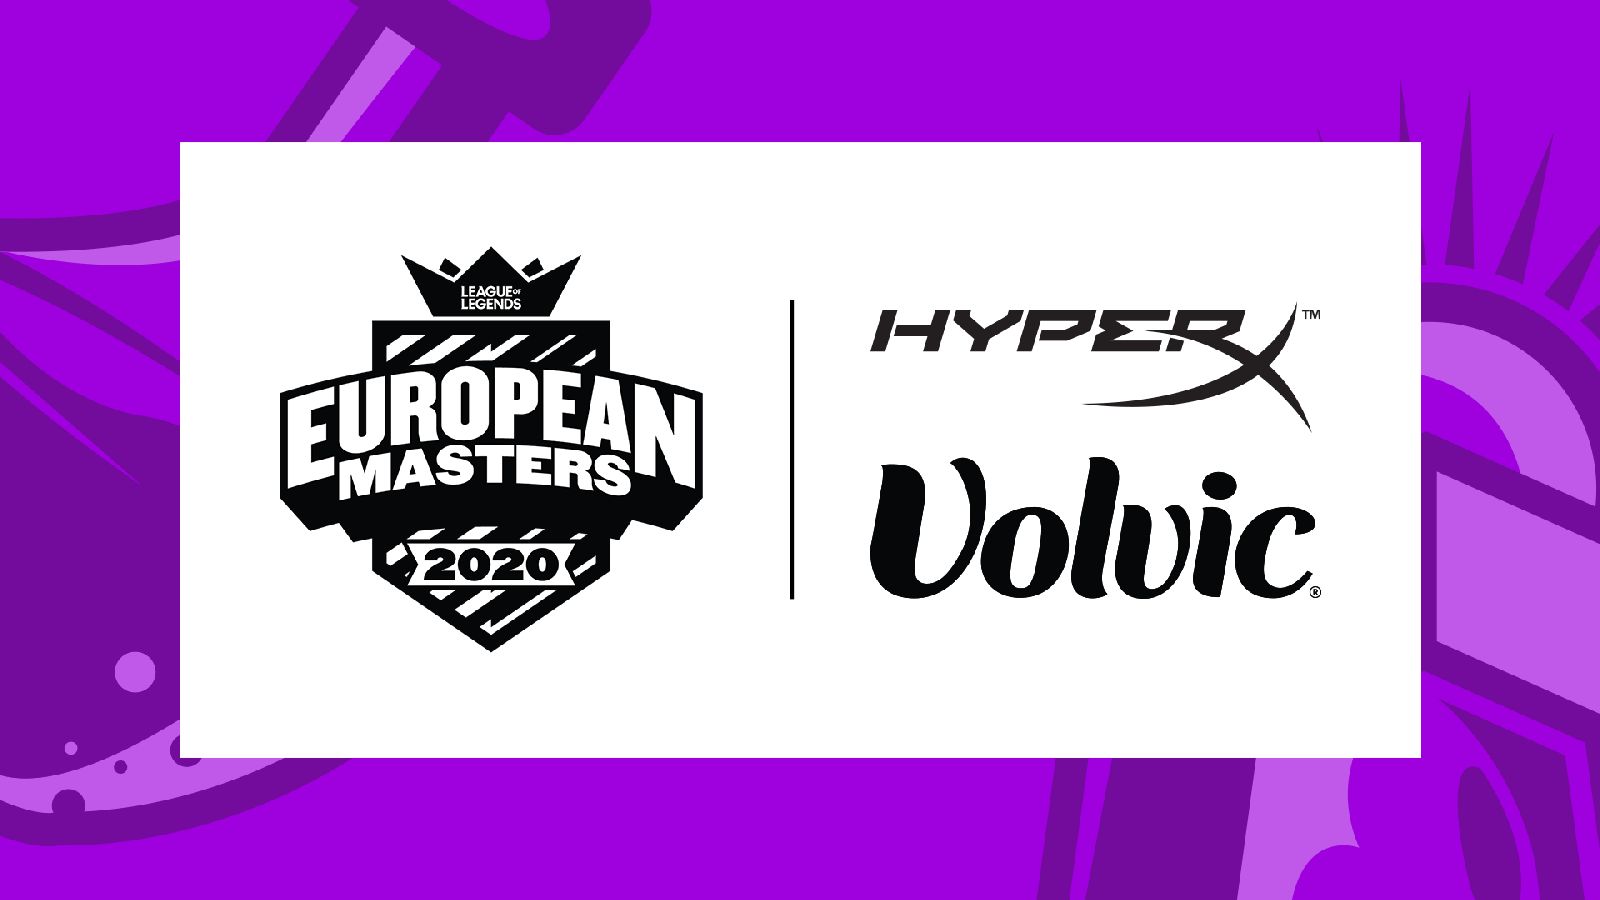 European Masters finds summertime partners in HyperX and Volvic Germany